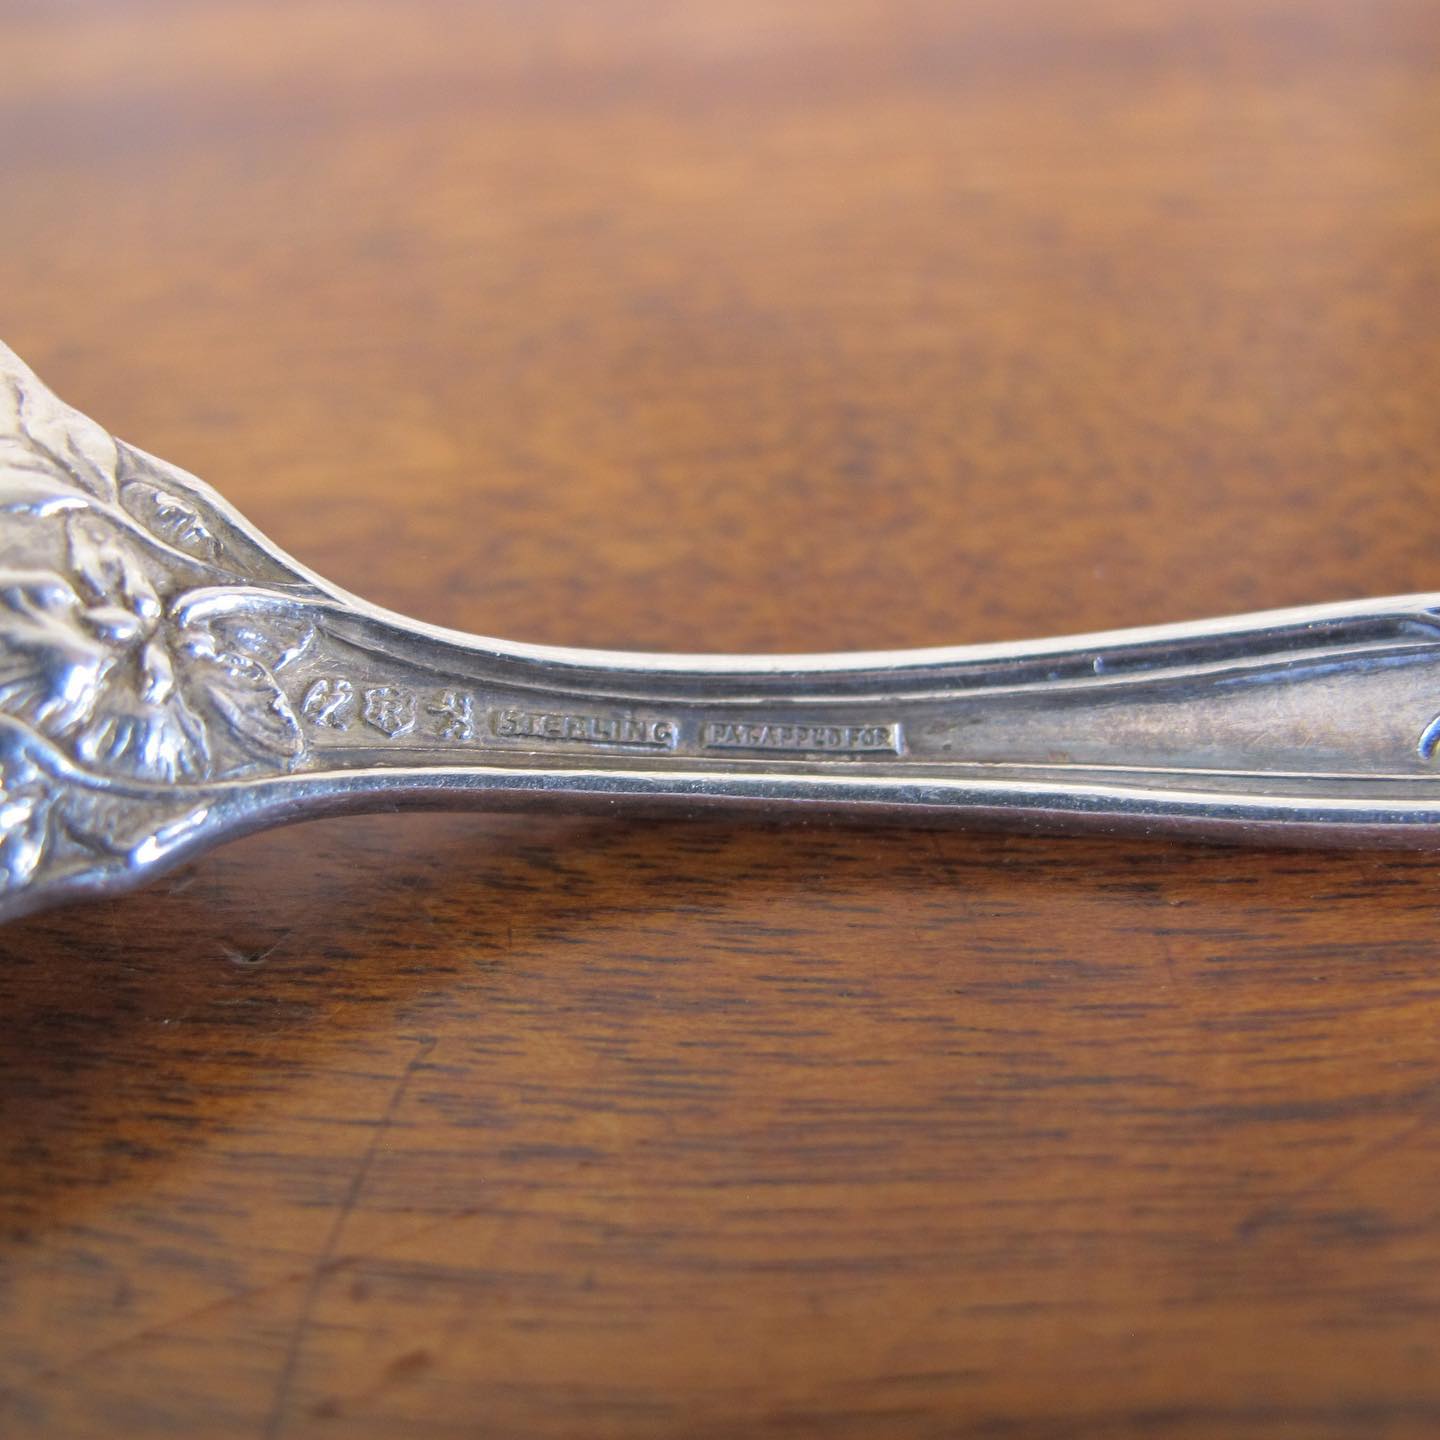 Ten Art Nouveau sterling silver Reed & Barton teaspoons, c. 1900, ‘Poppies’ pattern or possibly the ‘Les 5 Fleurs'